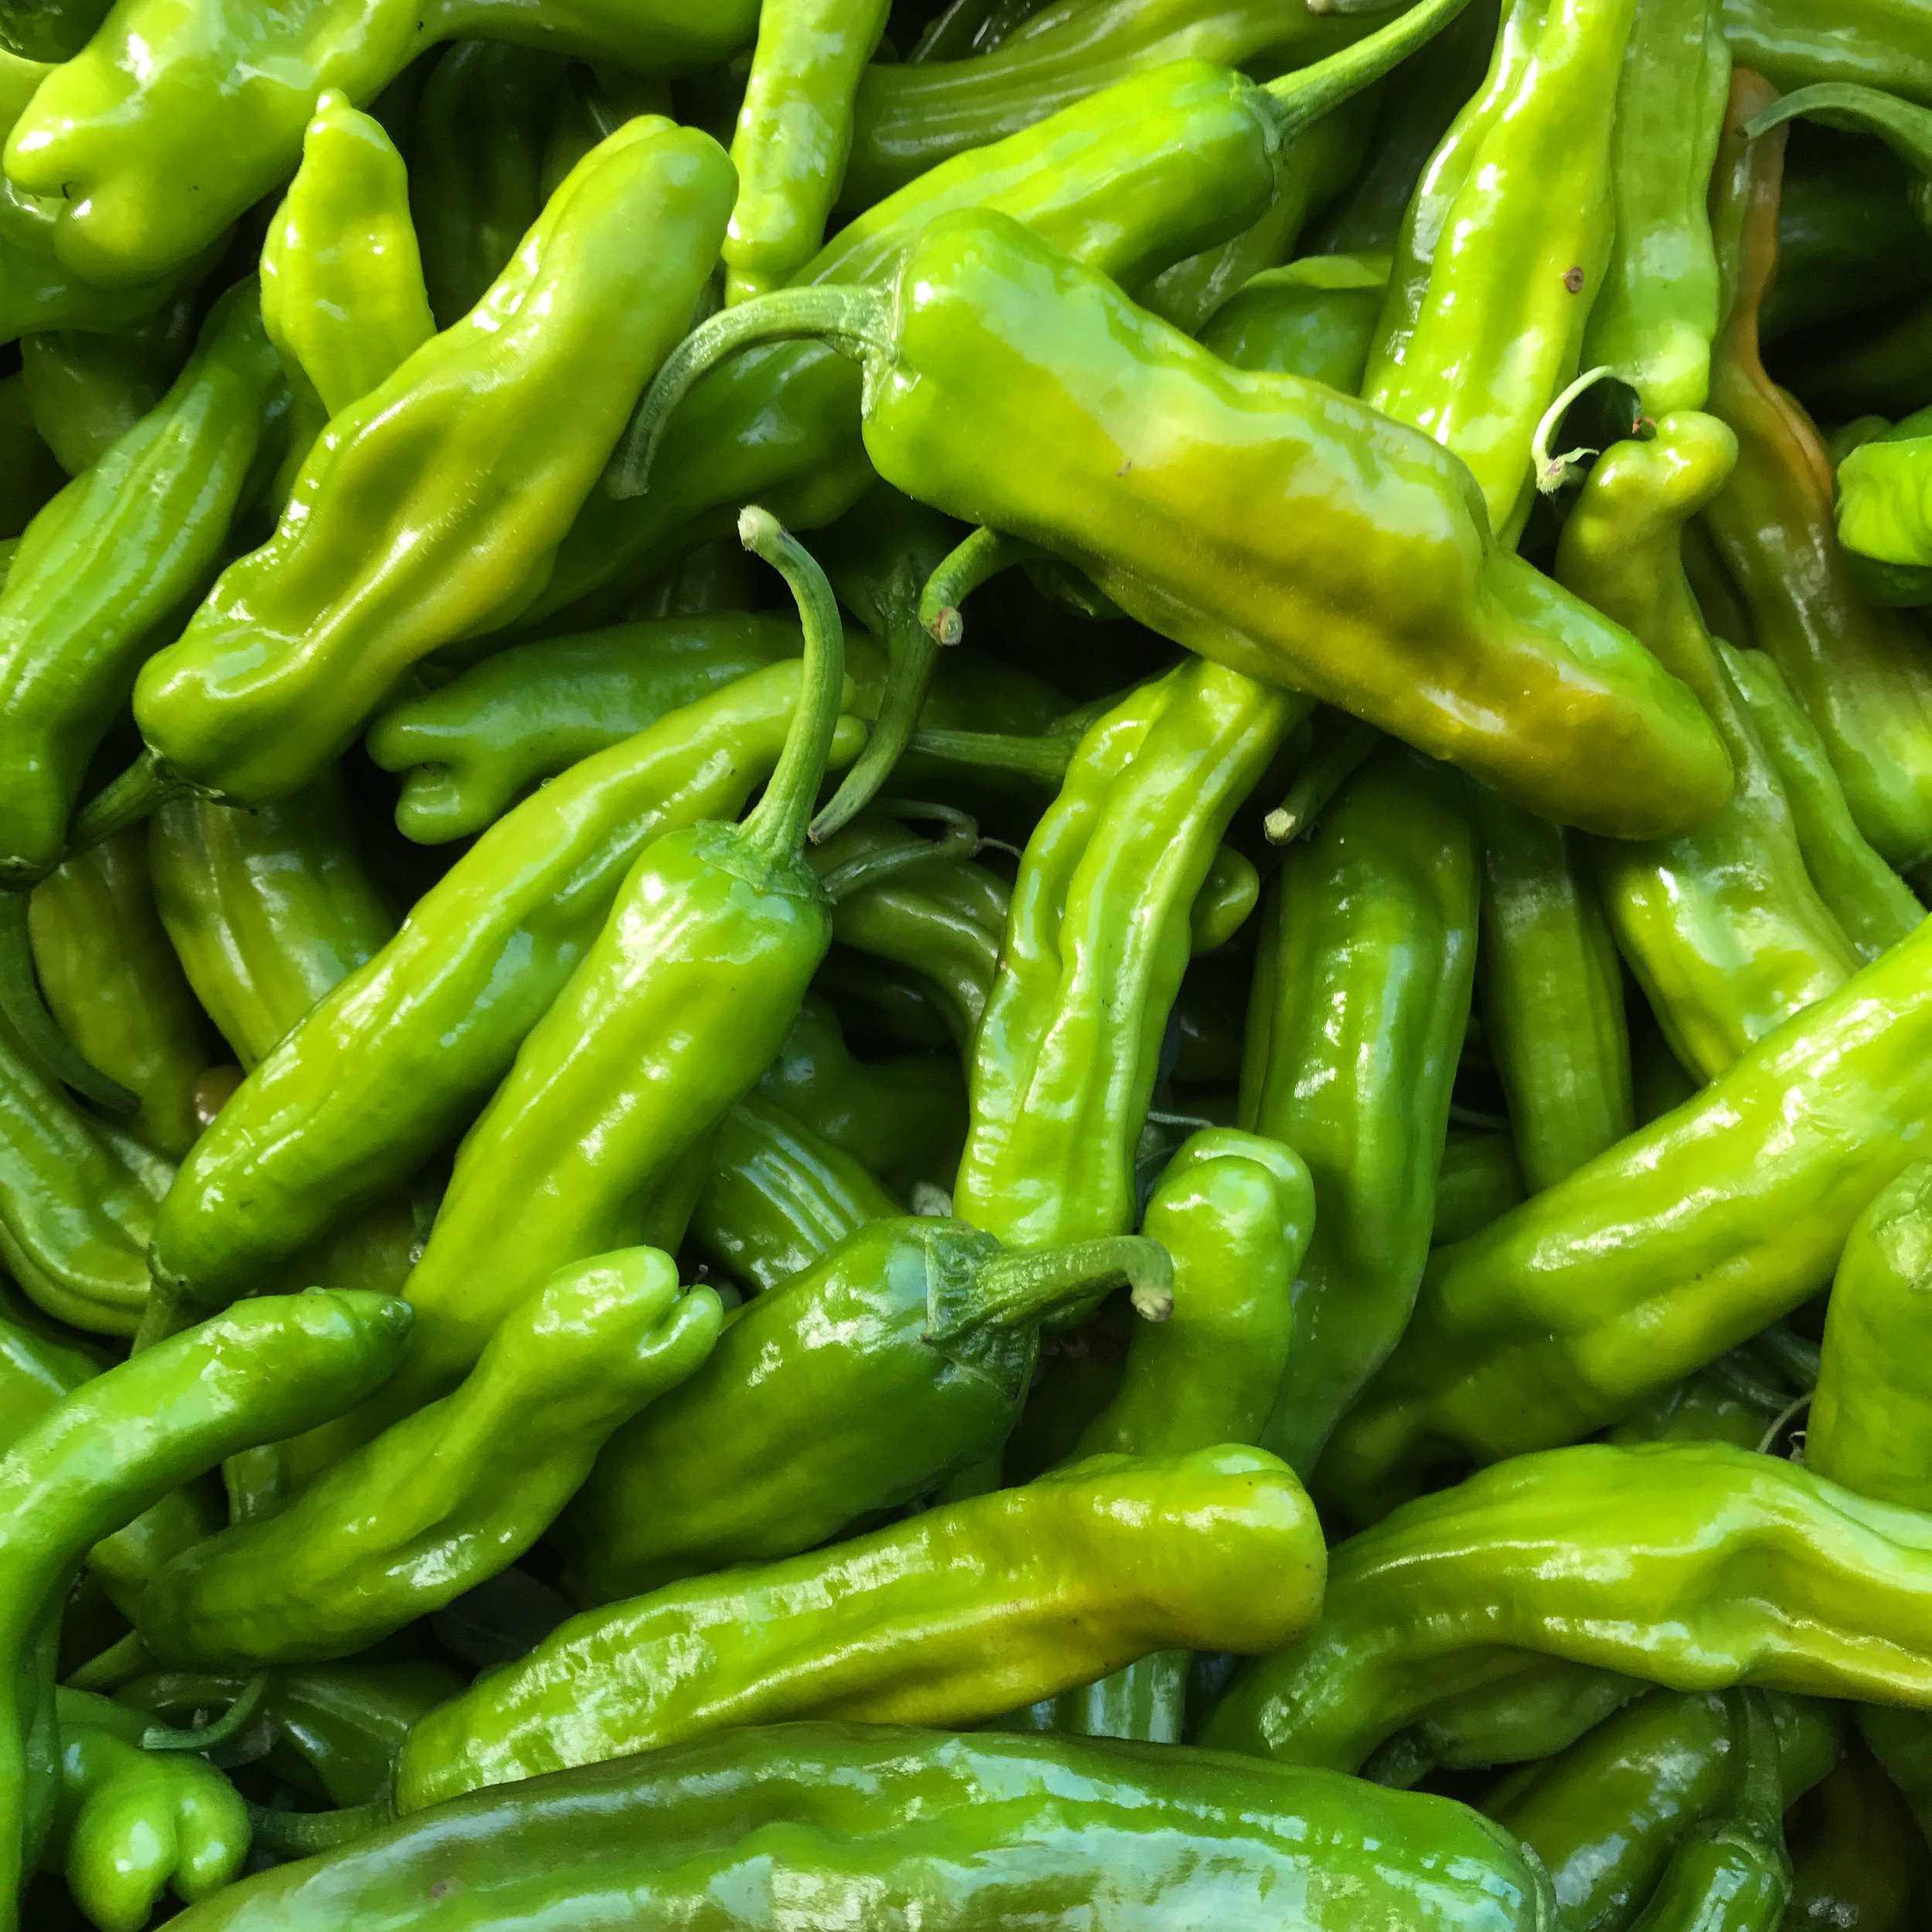 helsing junction farms csa shisito peppers